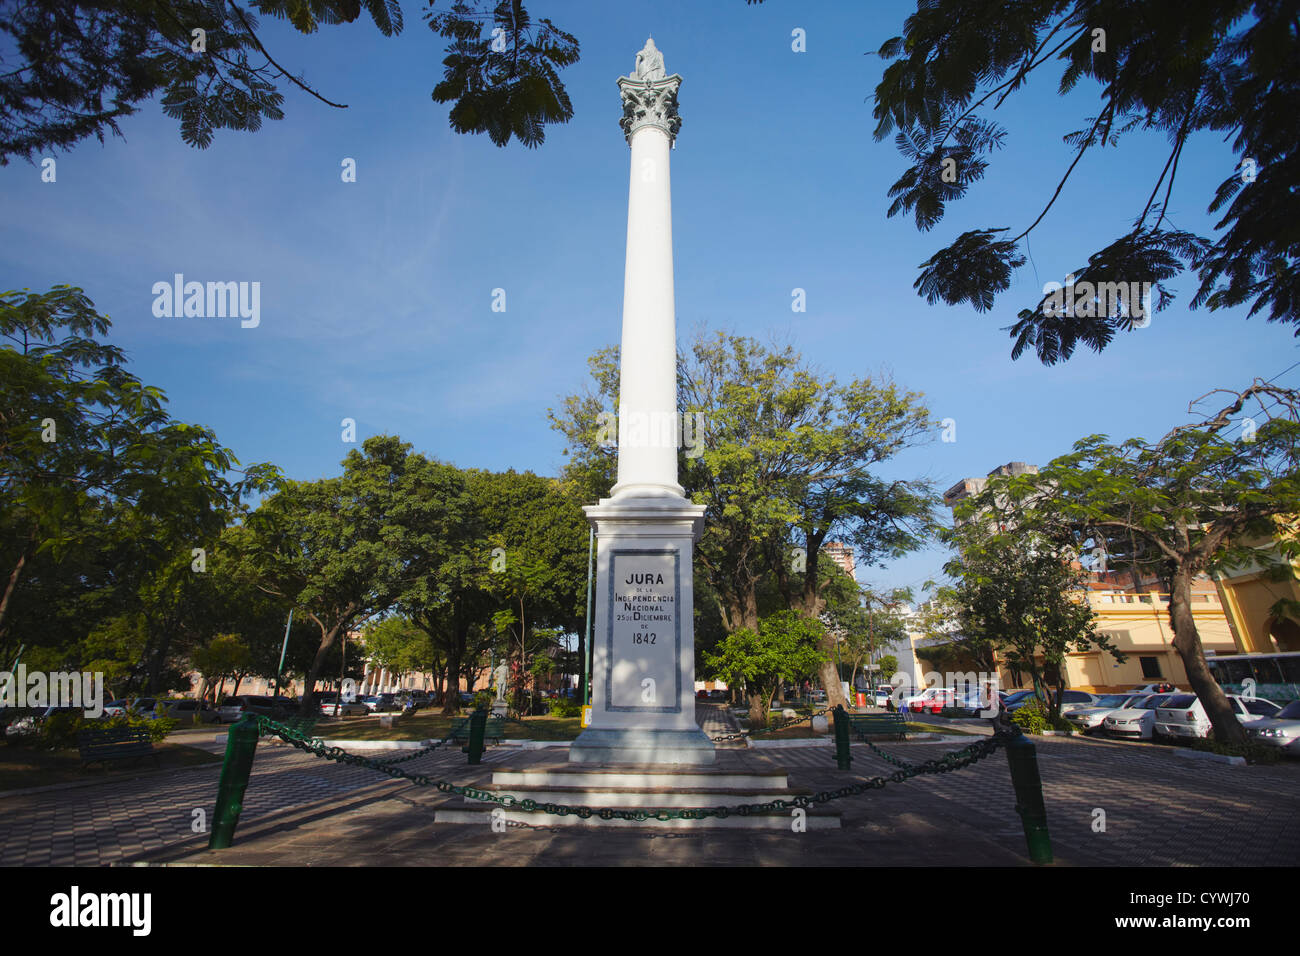 Monument in Plaza Constitution, Asuncion, Paraguay Stock Photo